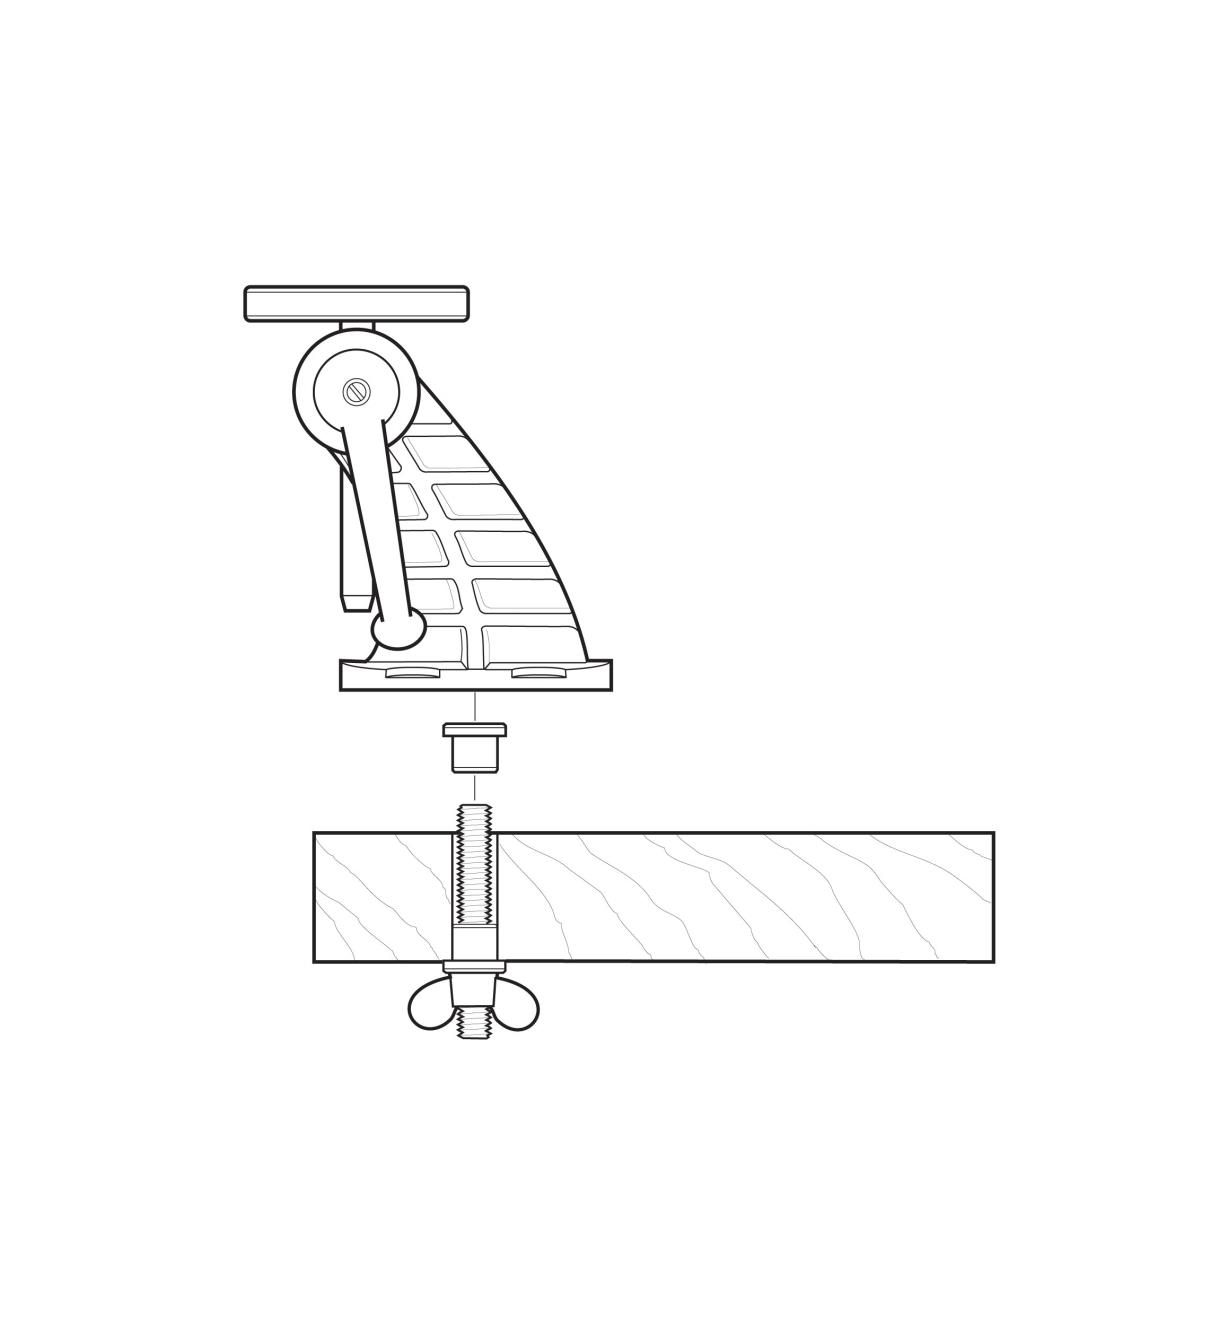 Illustration showing how to bolt the vise to a bench through a dog hole with the mounting plate horizontal